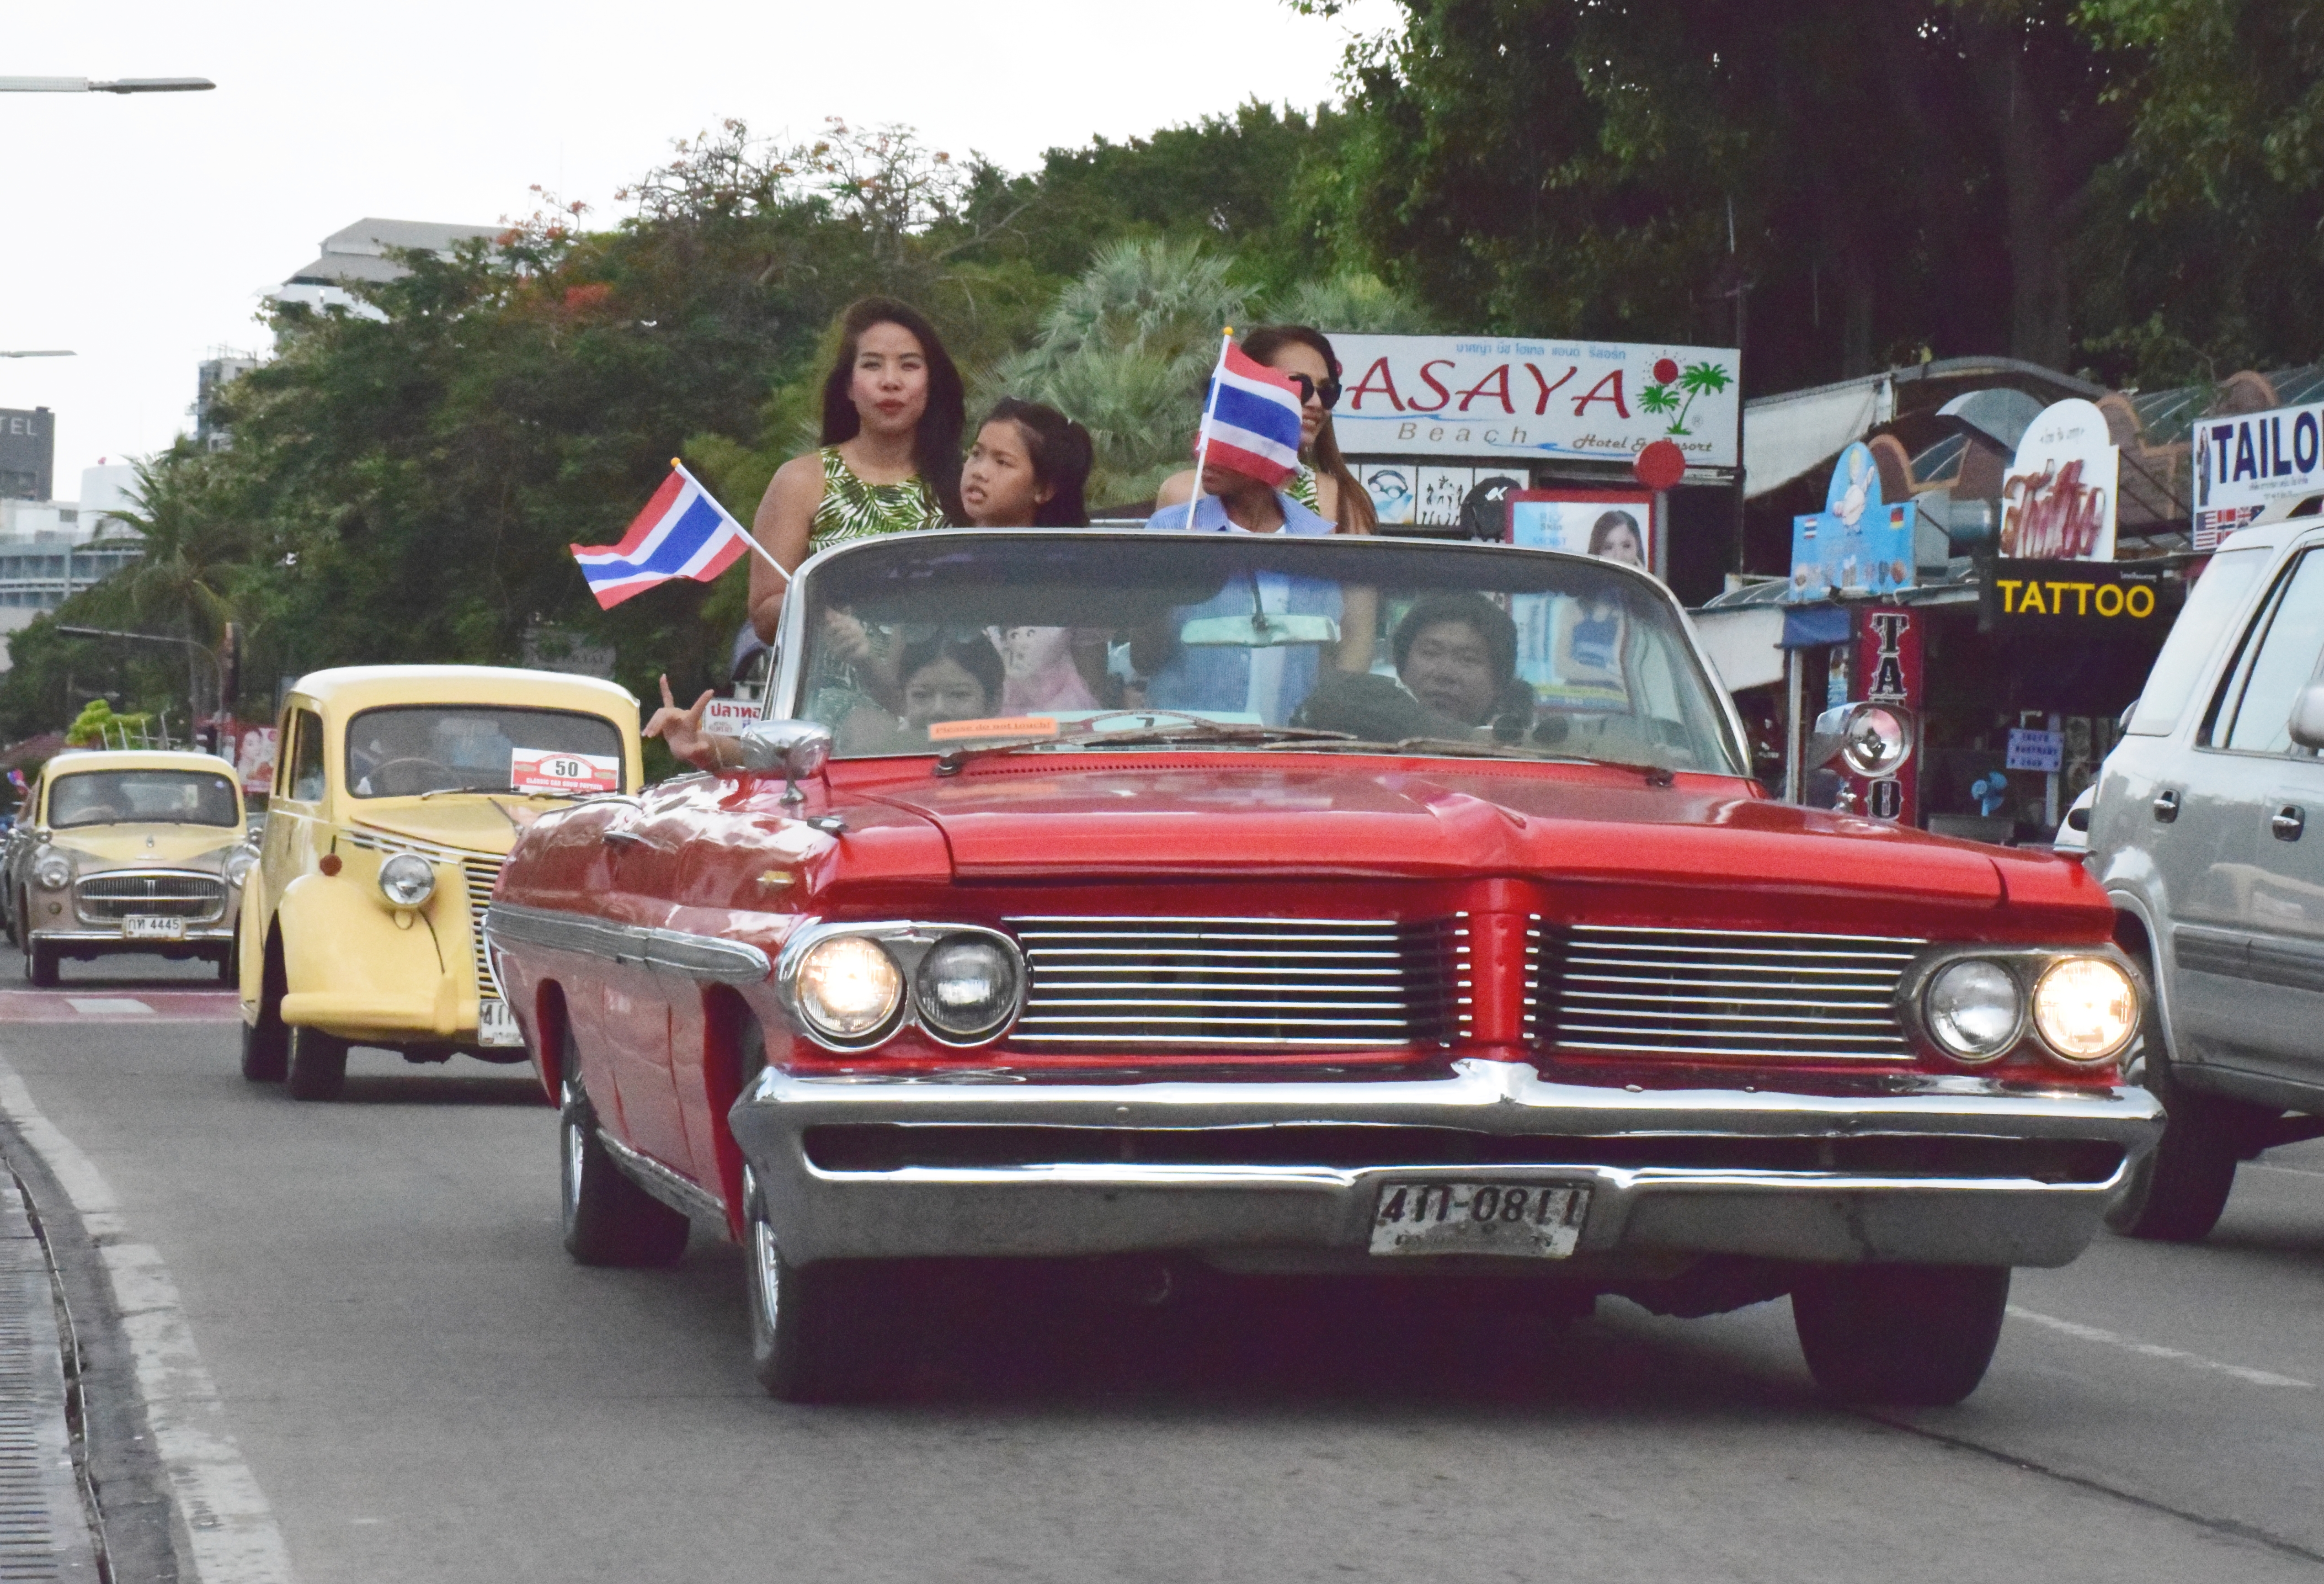 Last weekend Pattaya hosted one of the largest collection ever of Classic Cars in Thailand for the second annual Classic Car Show, this year held at the Asia Pattaya hotel. Shown here, a 1962 Pontiac Bonneville Convertible, owned and driven by Thanate Jinchotikul, brings sponsor women from the Riviera Group and children from beneficiaries the Child Protection and Development Centre along Beach Road in a parade of 46 classic, vintage and sports cars, the largest ever in Thailand.